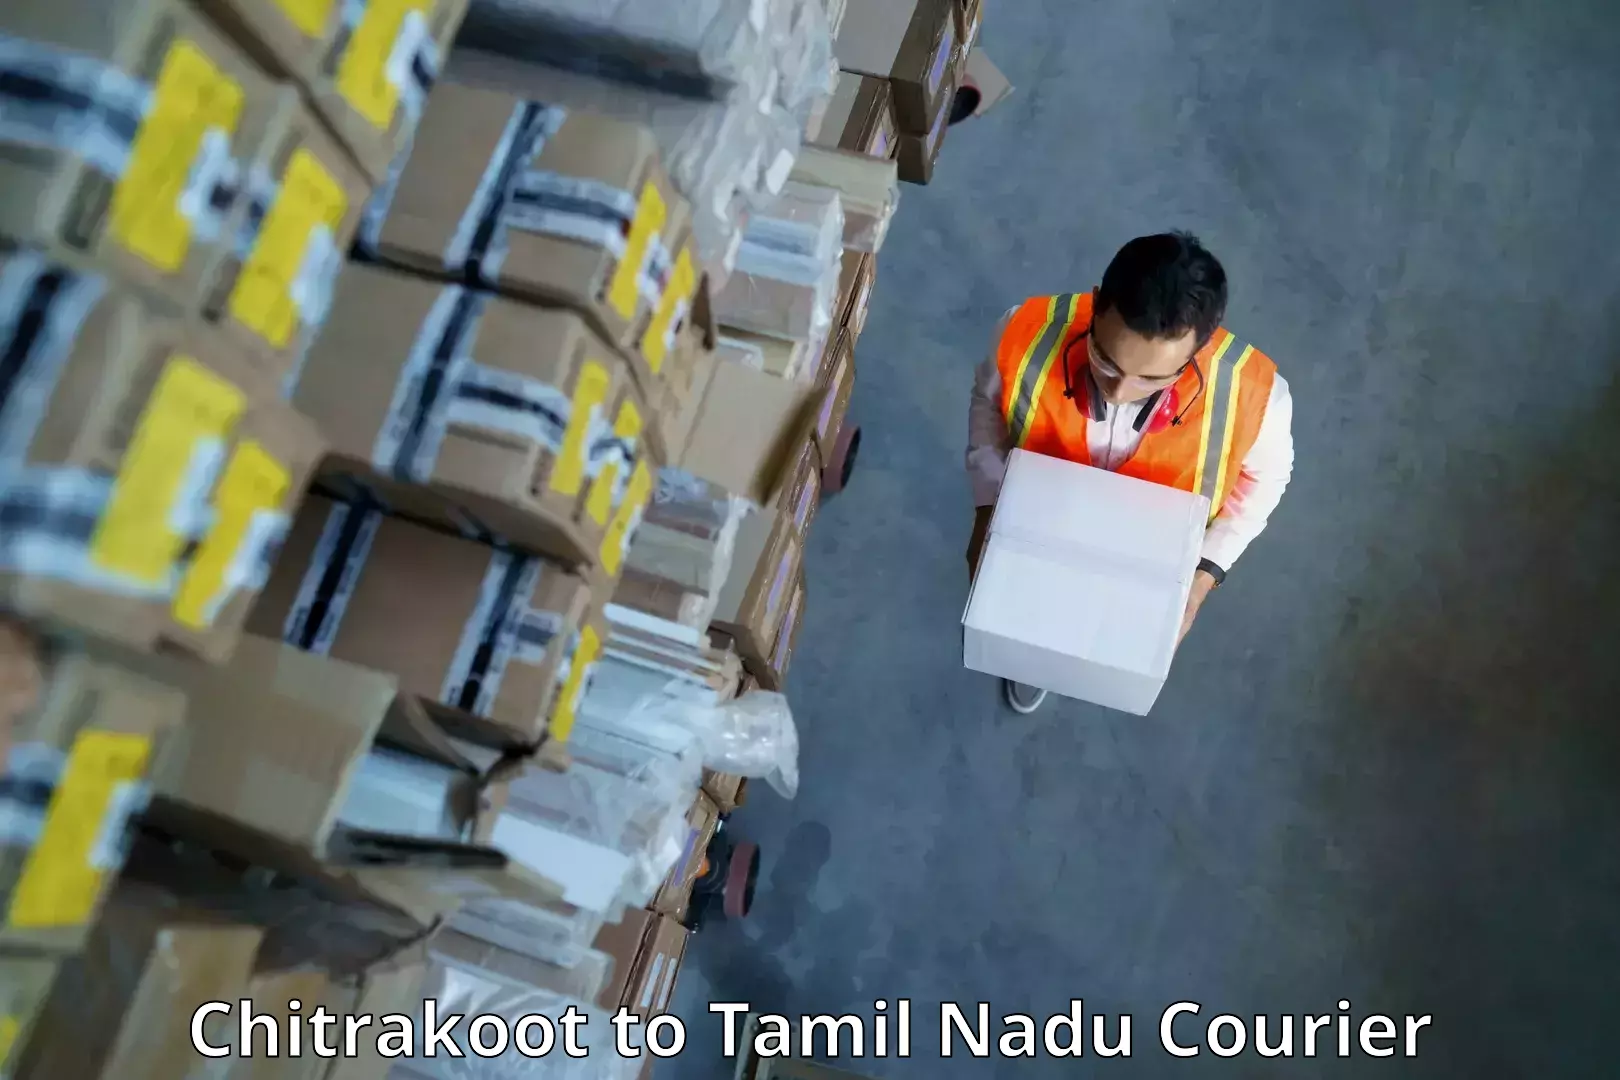 Rapid shipping services Chitrakoot to Dindigul